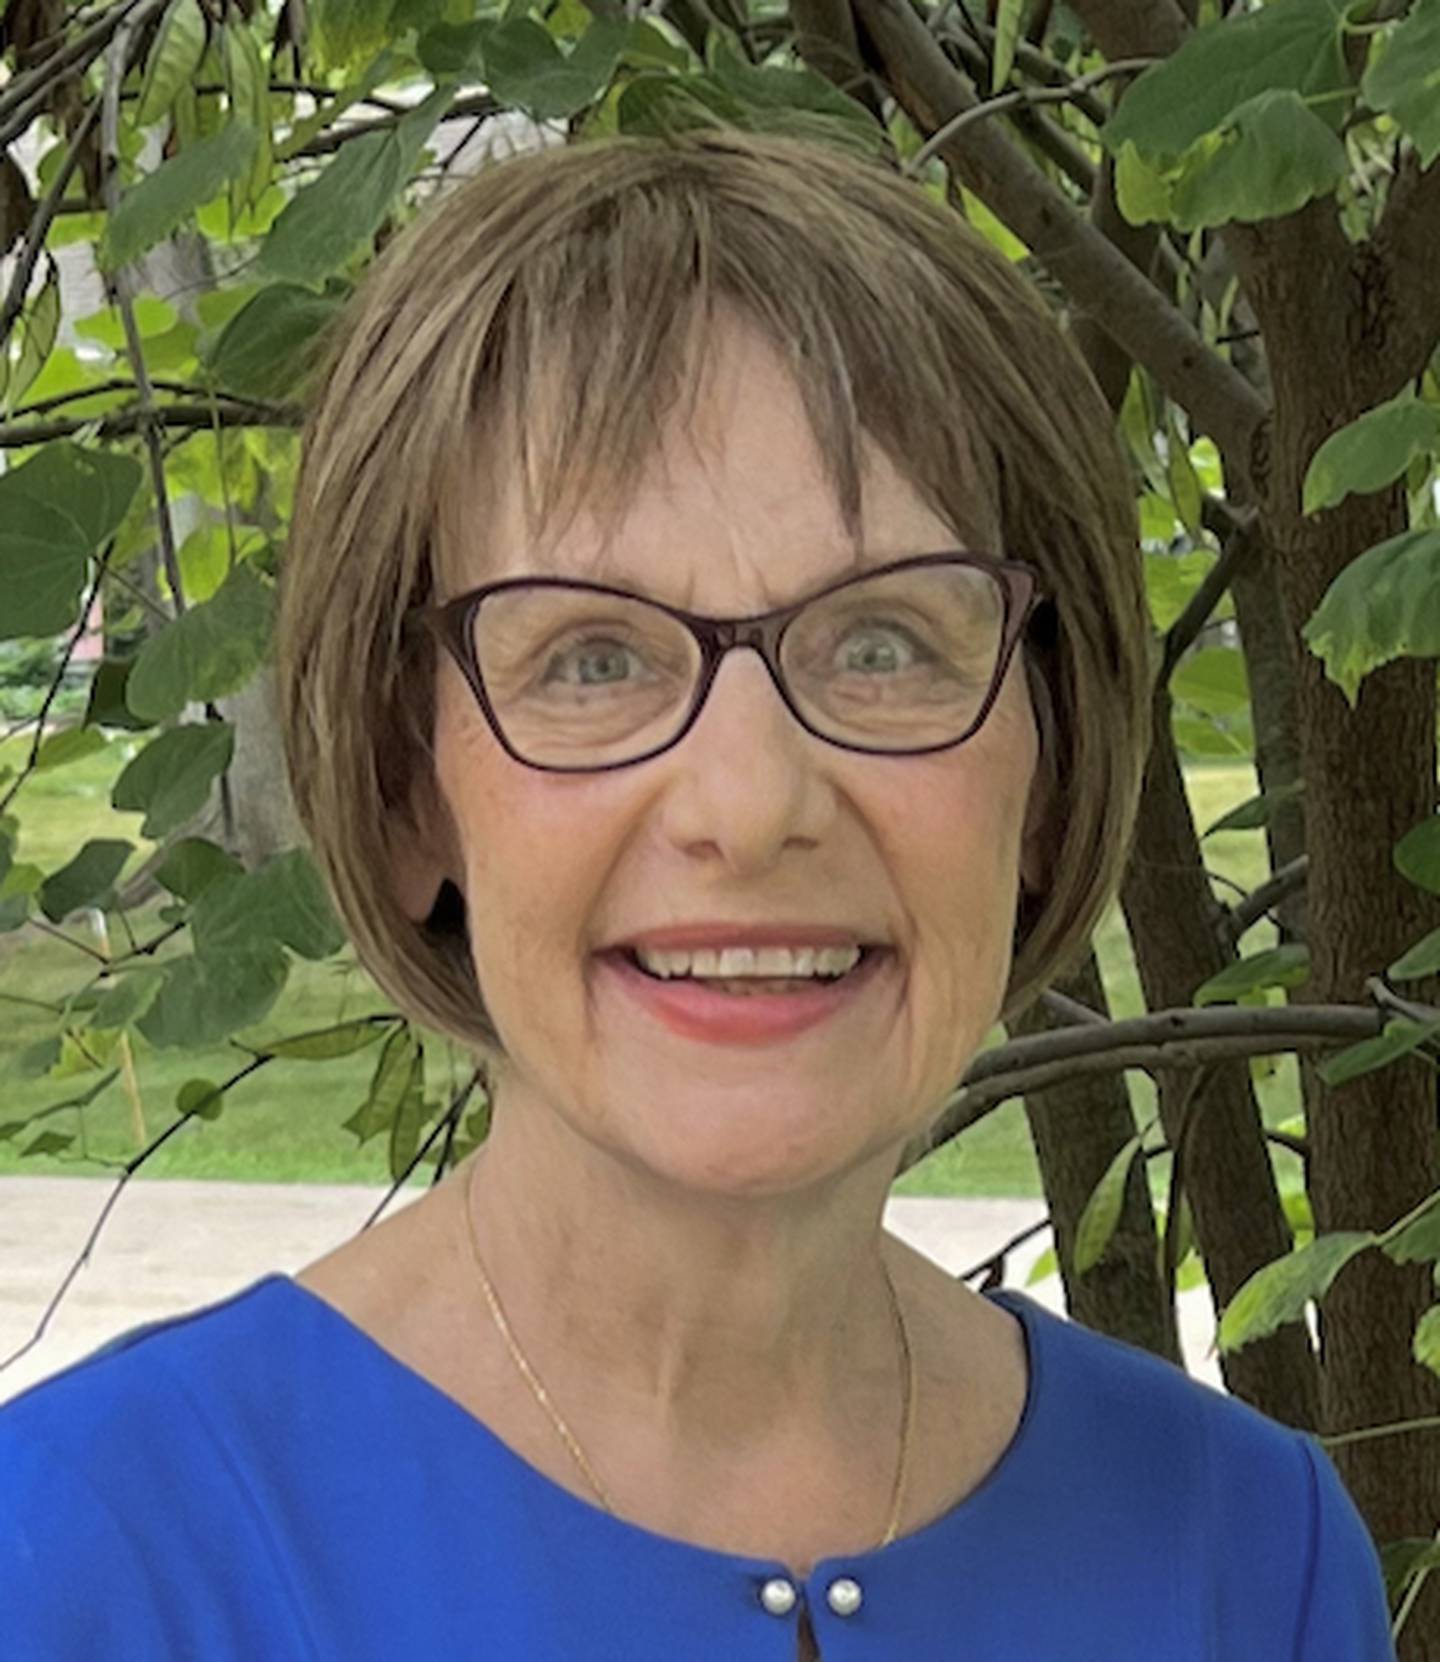 Linda Robertson is a St. Charles Democrat who filed nominating papers to run against incumbent Daniel Ugaste, R-Geneva, to represent the state’s 65th District.